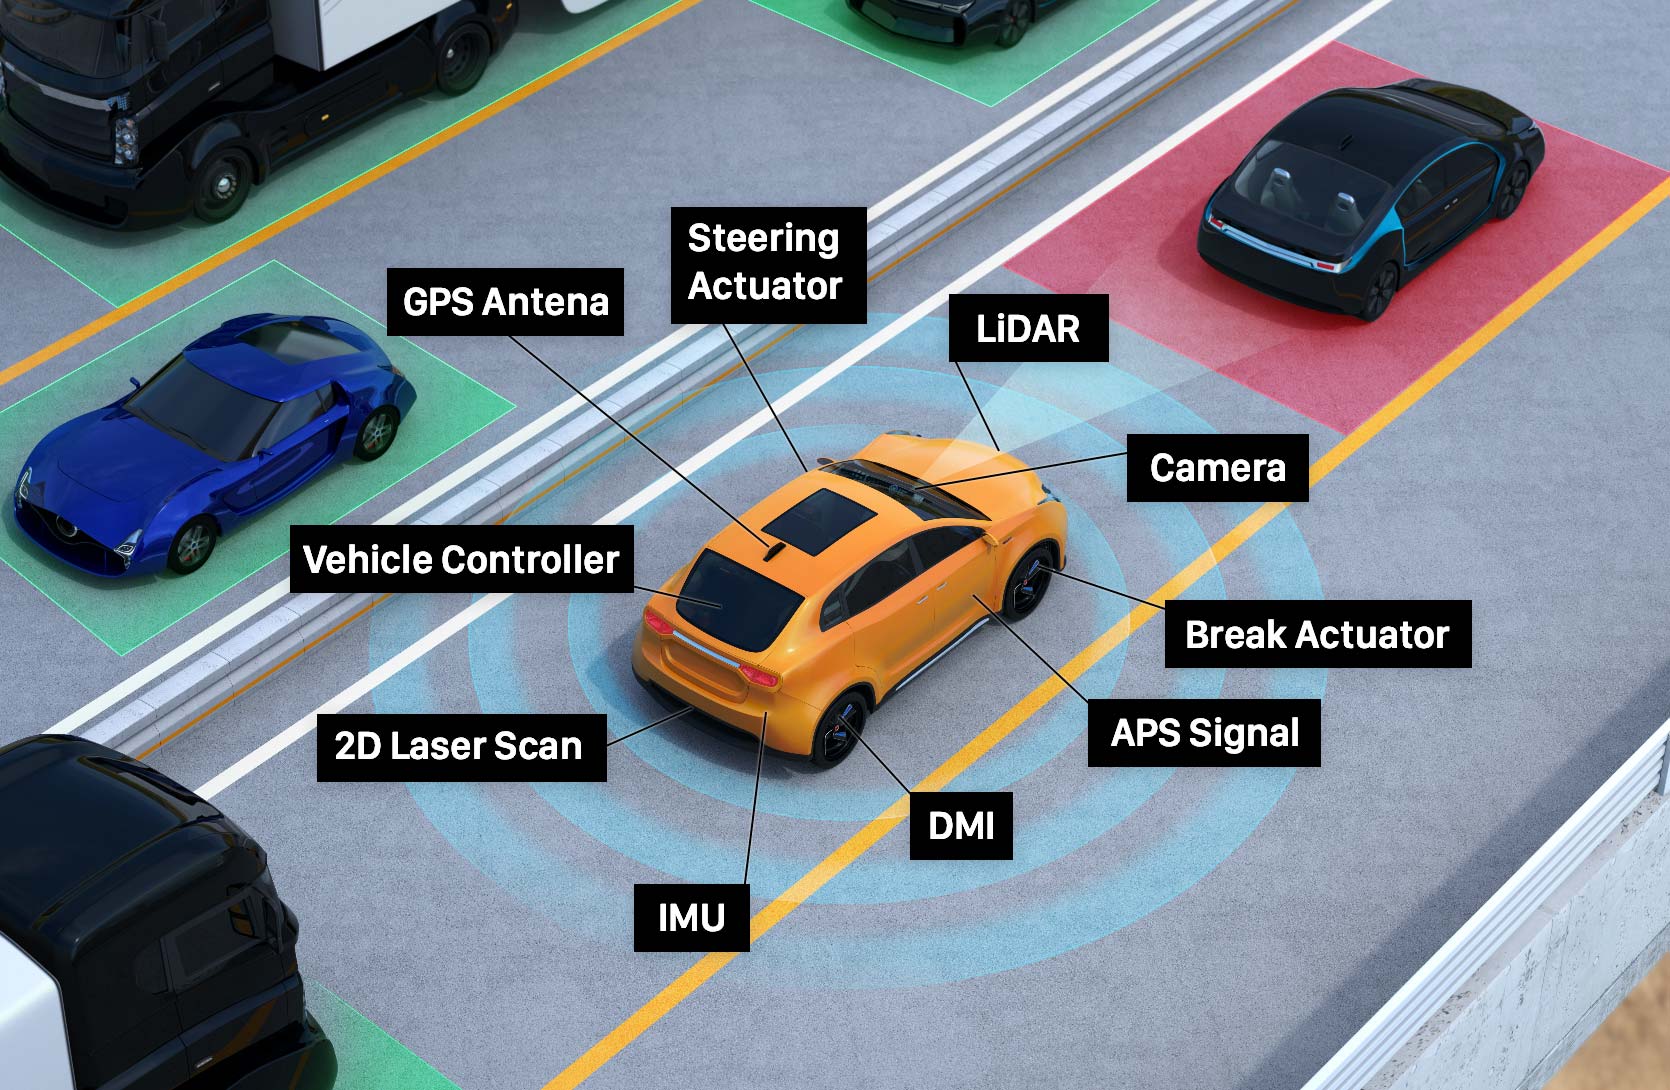 Types of sensors and actuators on a self-driving vehicle